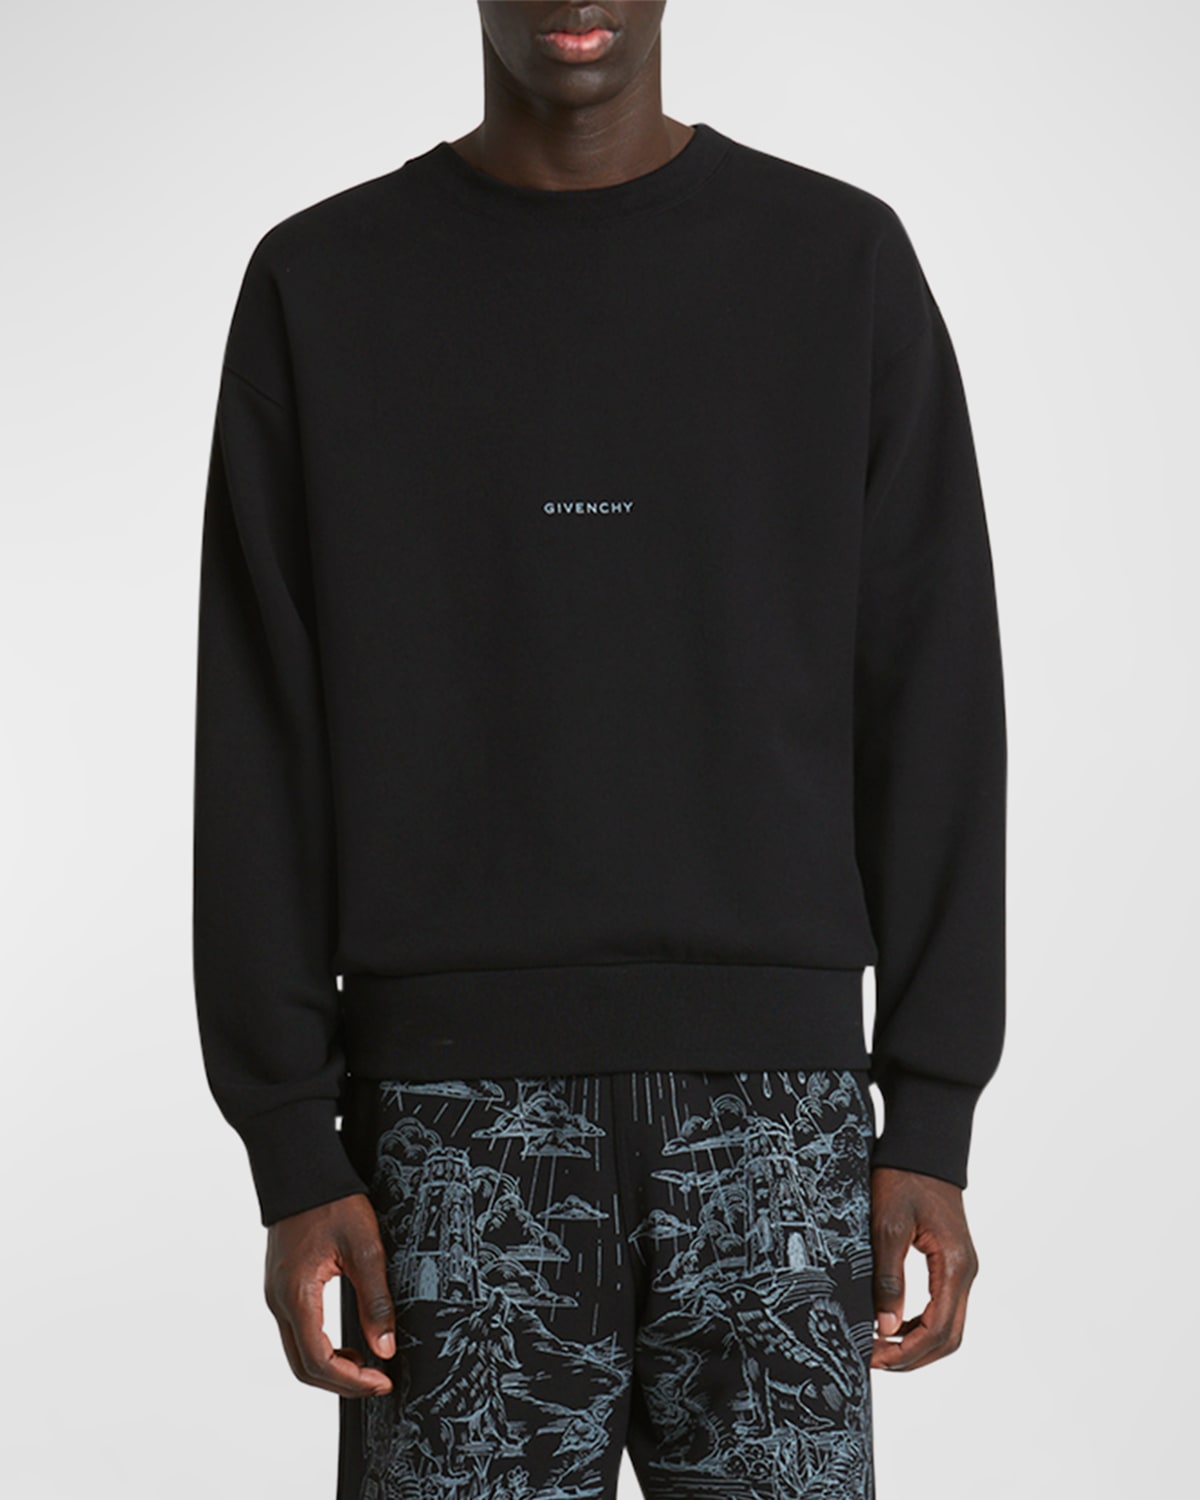 Givenchy Men's Boxy Graphic Sweatshirt In Black